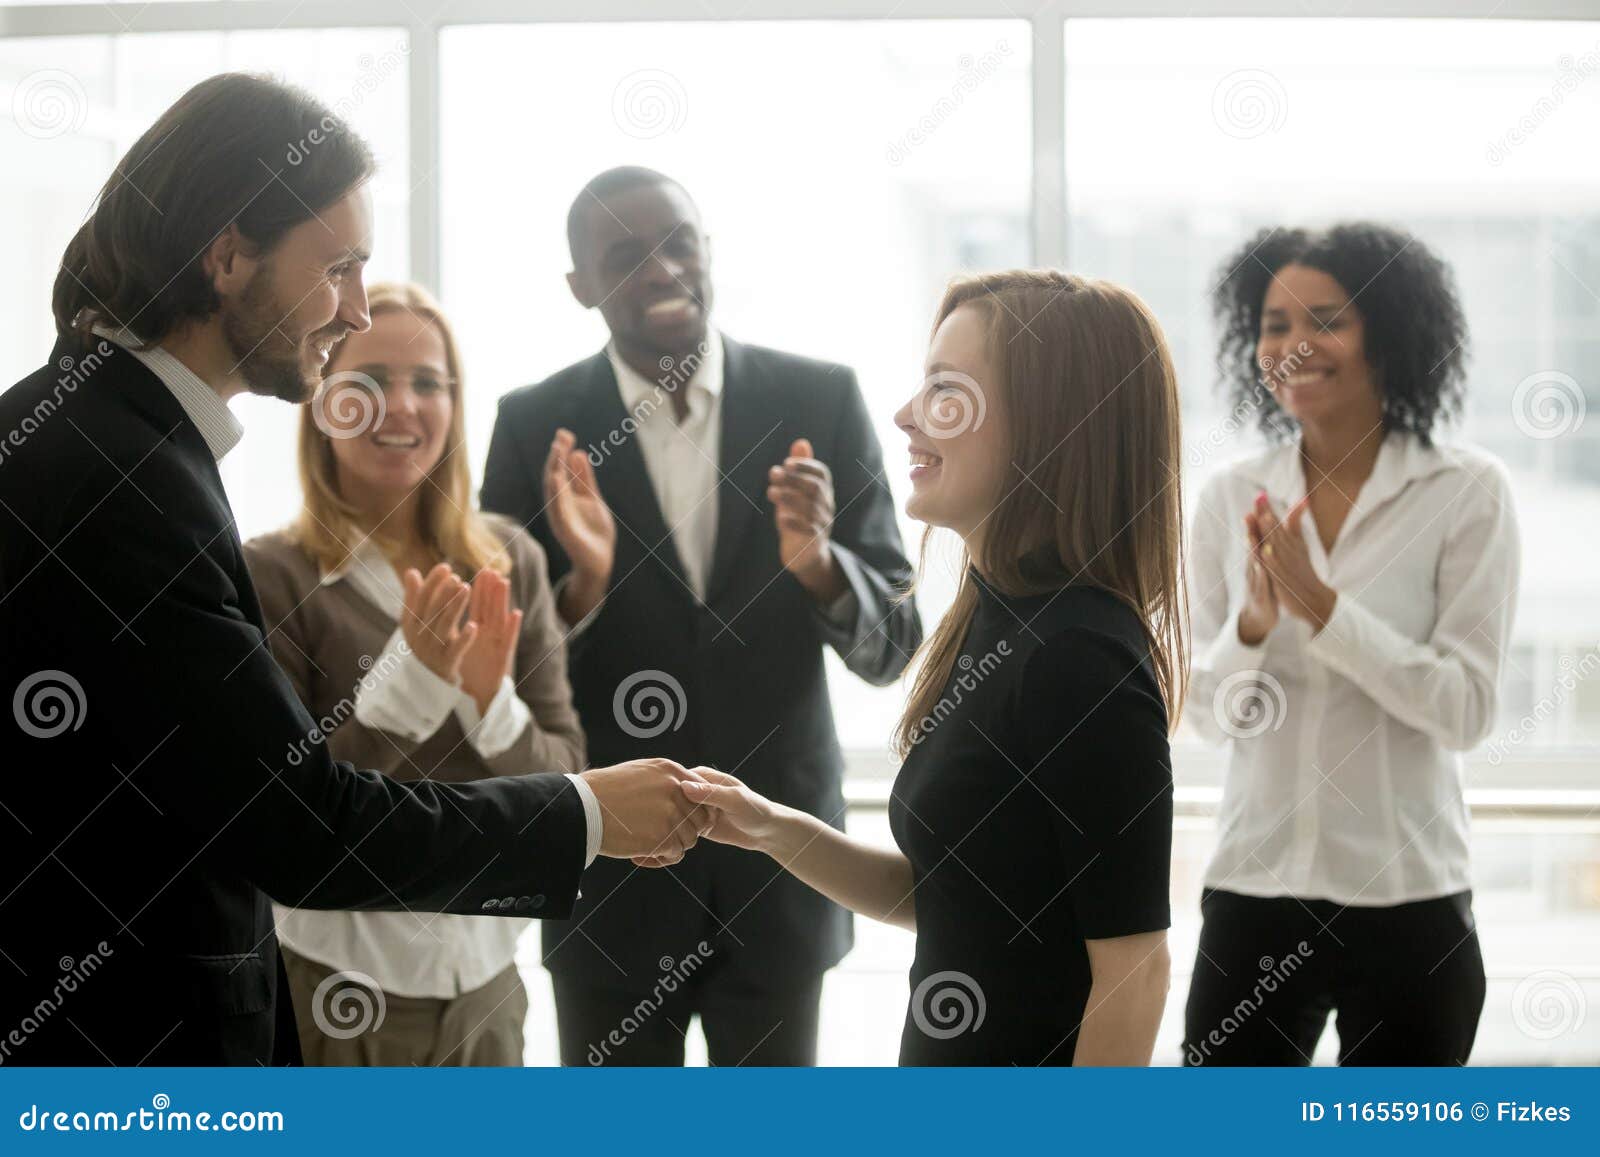 smiling ceo handshaking successful female worker showing respect